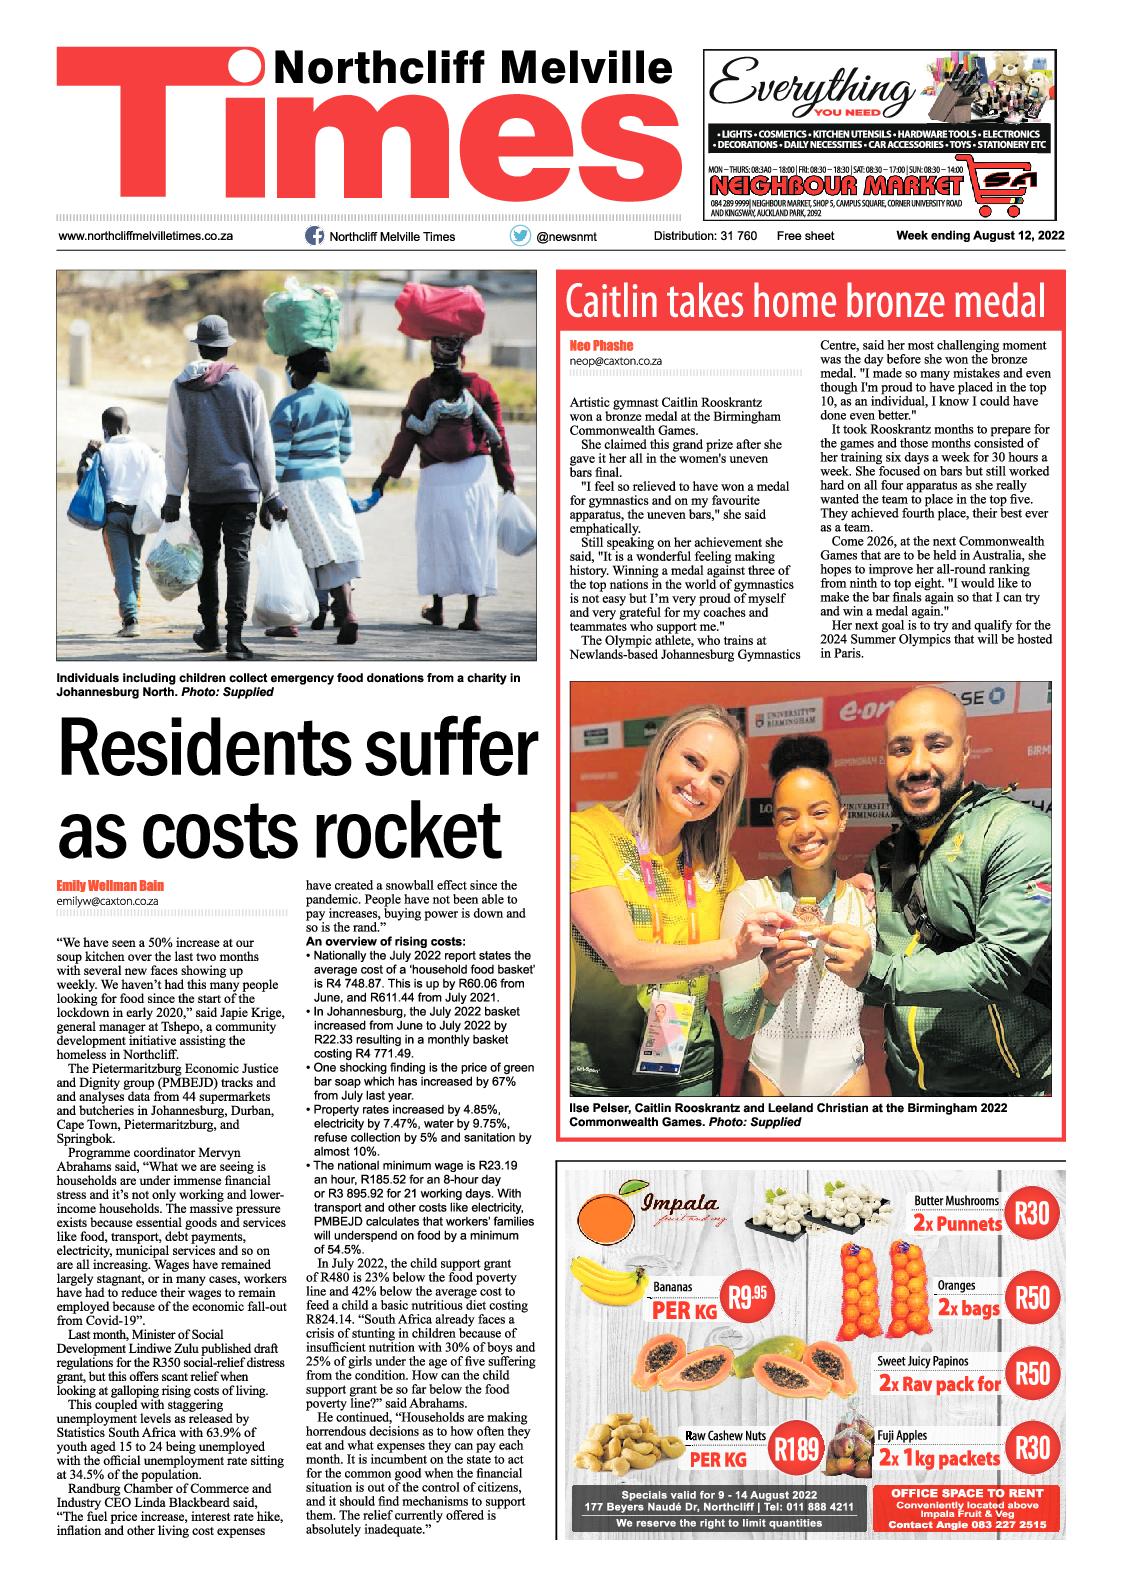 Northcliff Melville Times August 12 2022 page 1